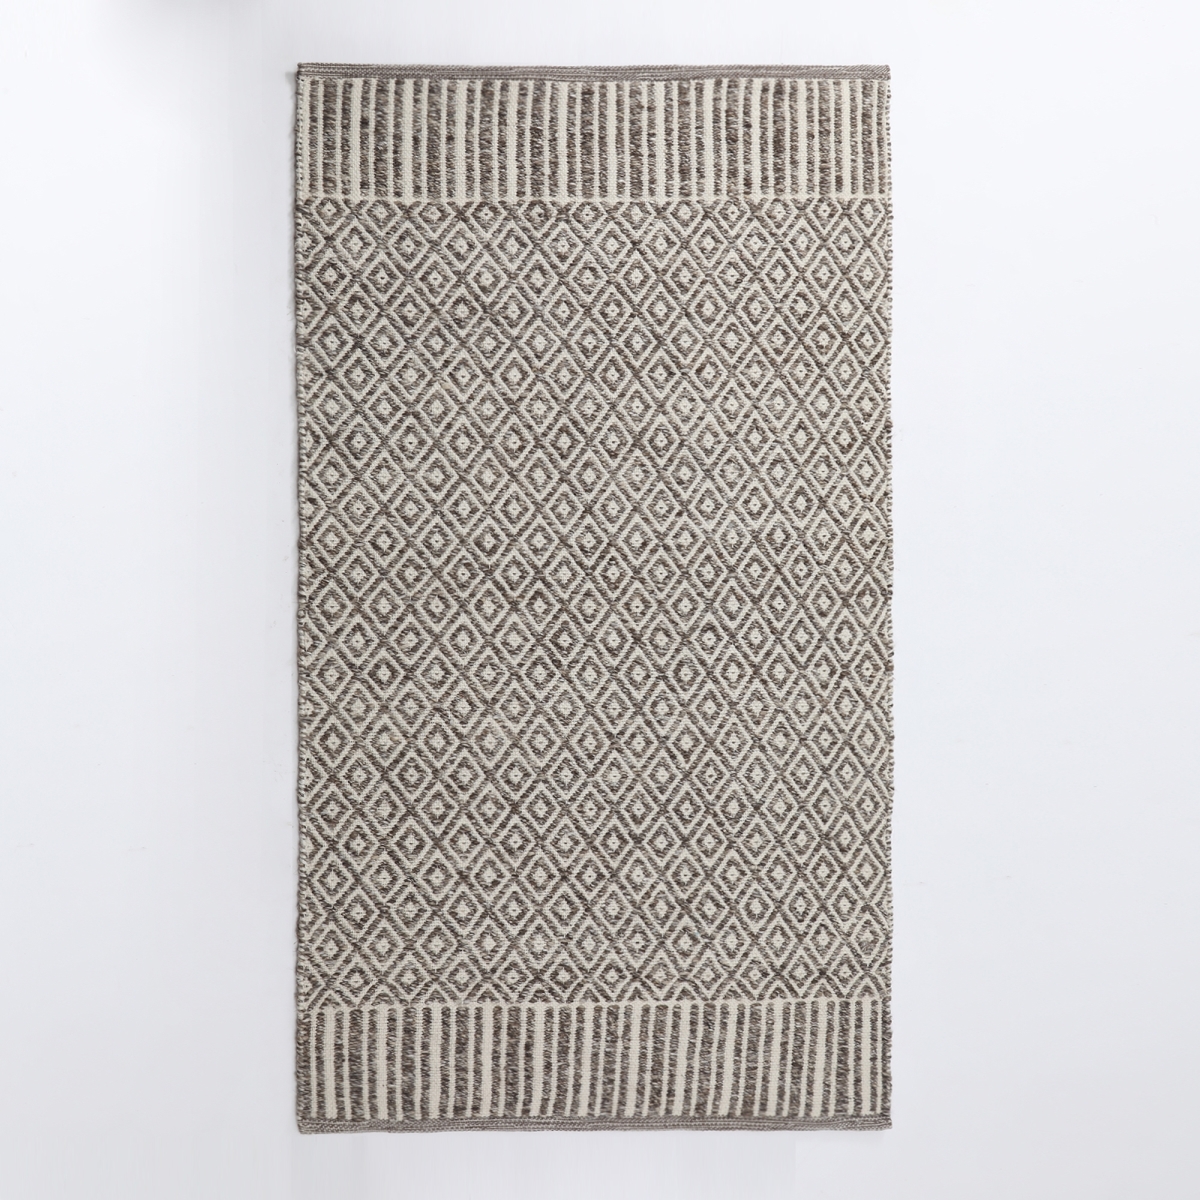 Whtxr638-l 4 X 6 Ft. Handwoven Cotton & Viscose Rug, Brown & White